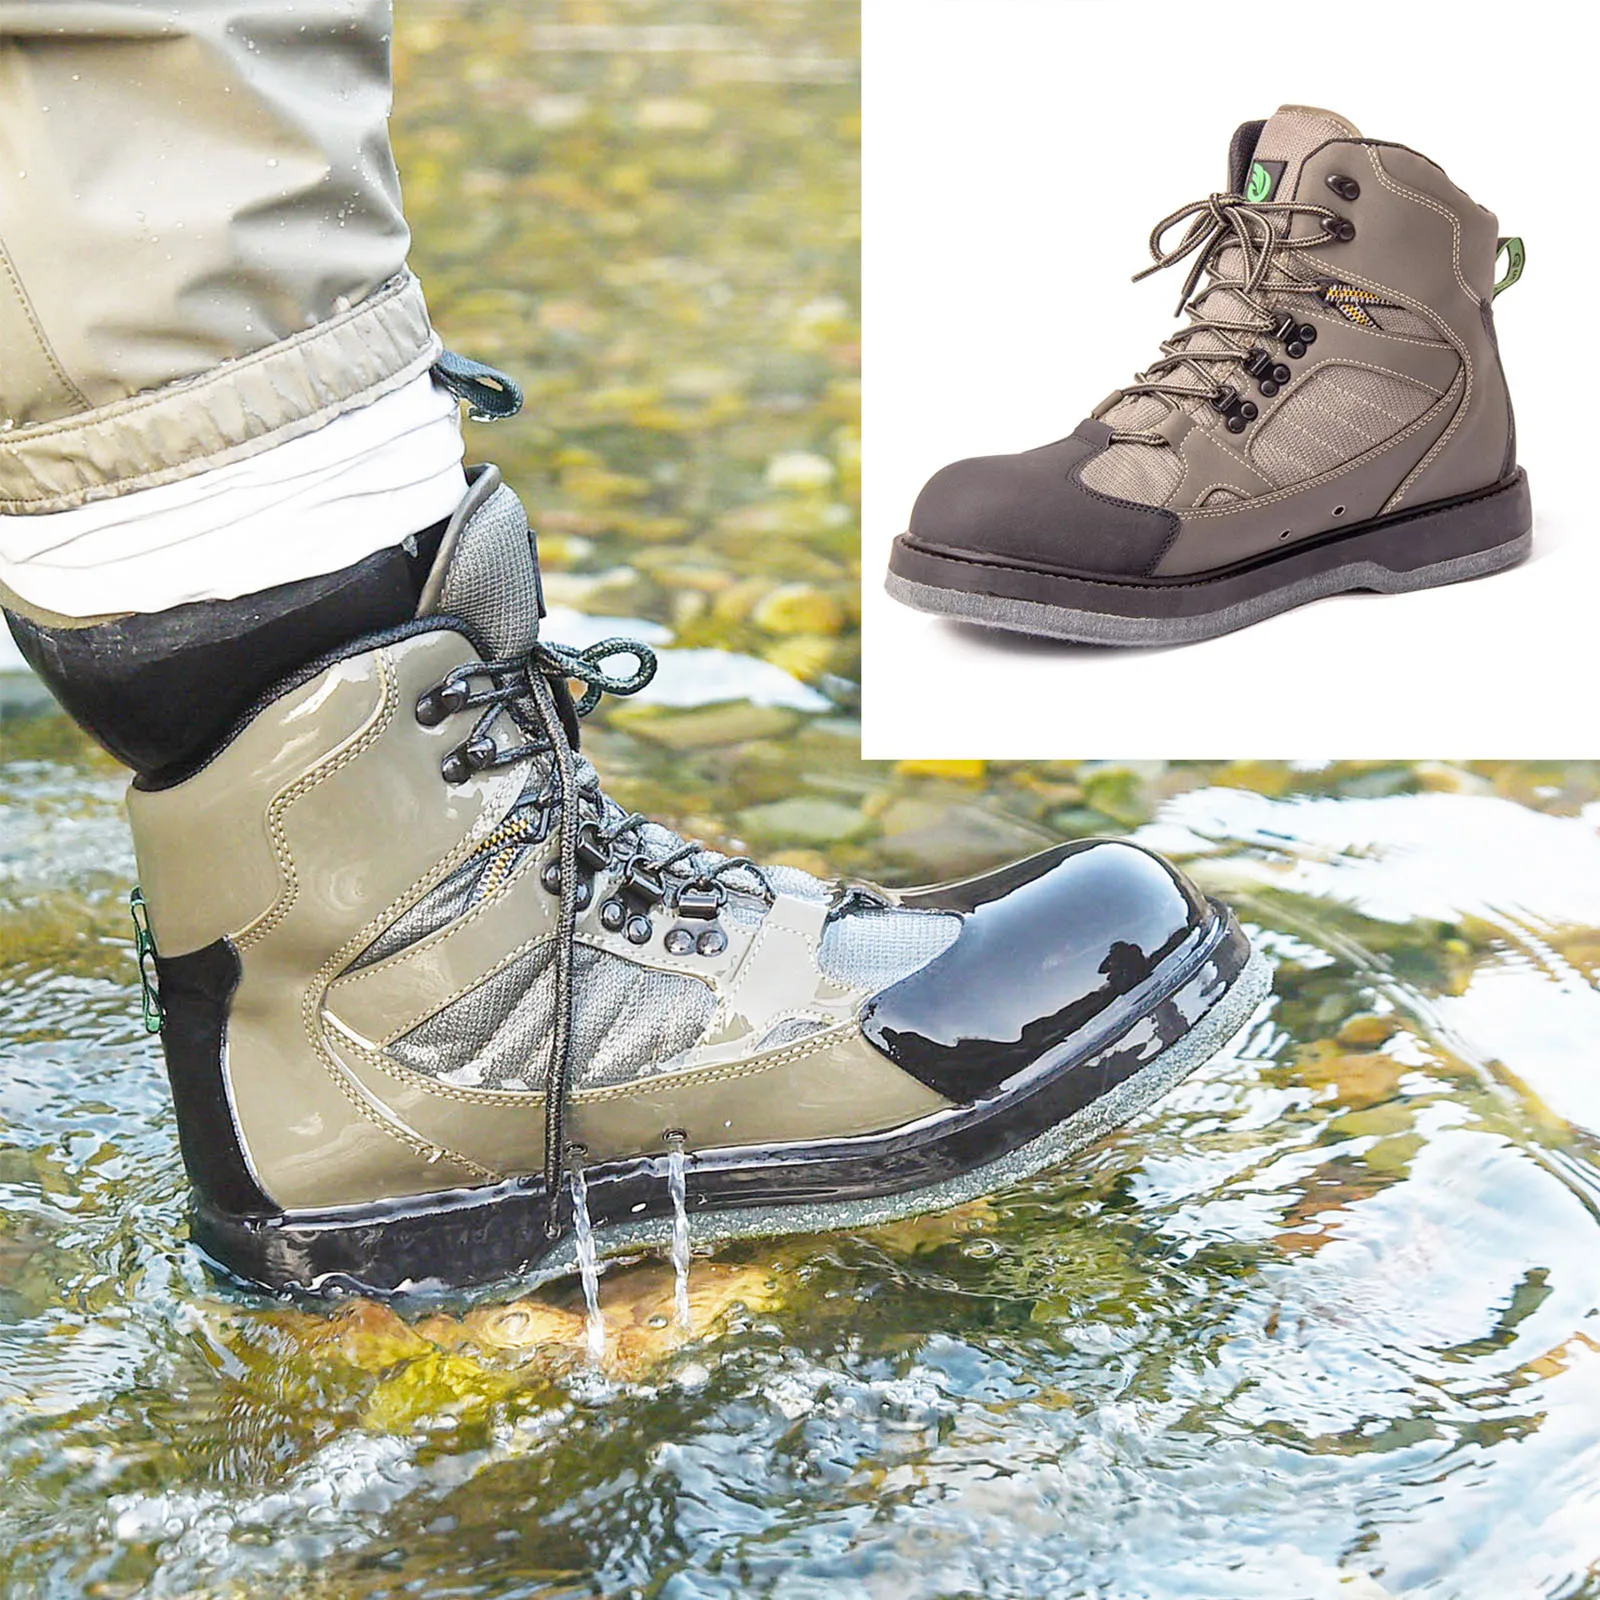 Promotional NeyGu Men's Fishing Wading Shoes, Breathable Boots for Water  and Outdoor Sports,Felt sole or Rubber Sole Available